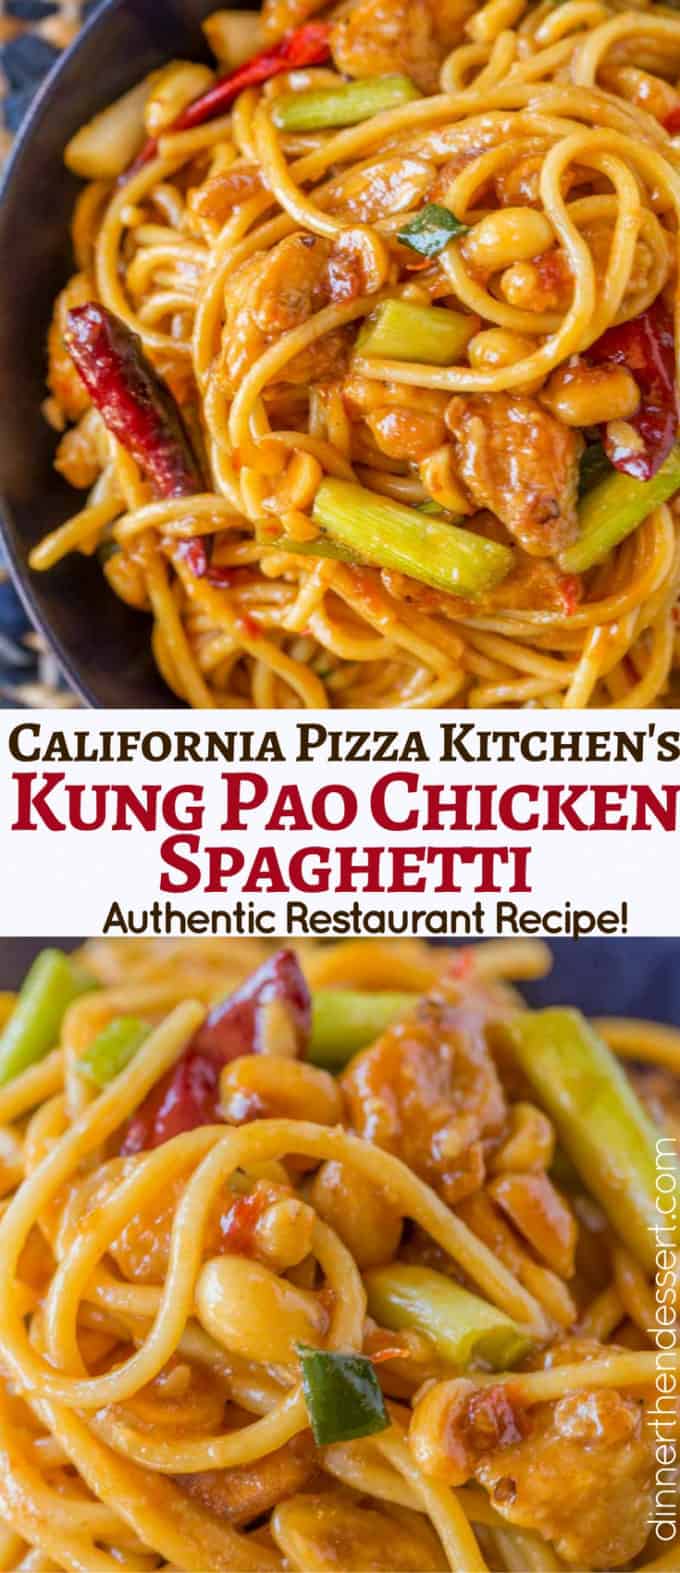 Kung Pao Chicken Spaghetti is deliciously spicy and sweet, a fan favorite and all time best seller from California Pizza Kitchen that you can make at home.